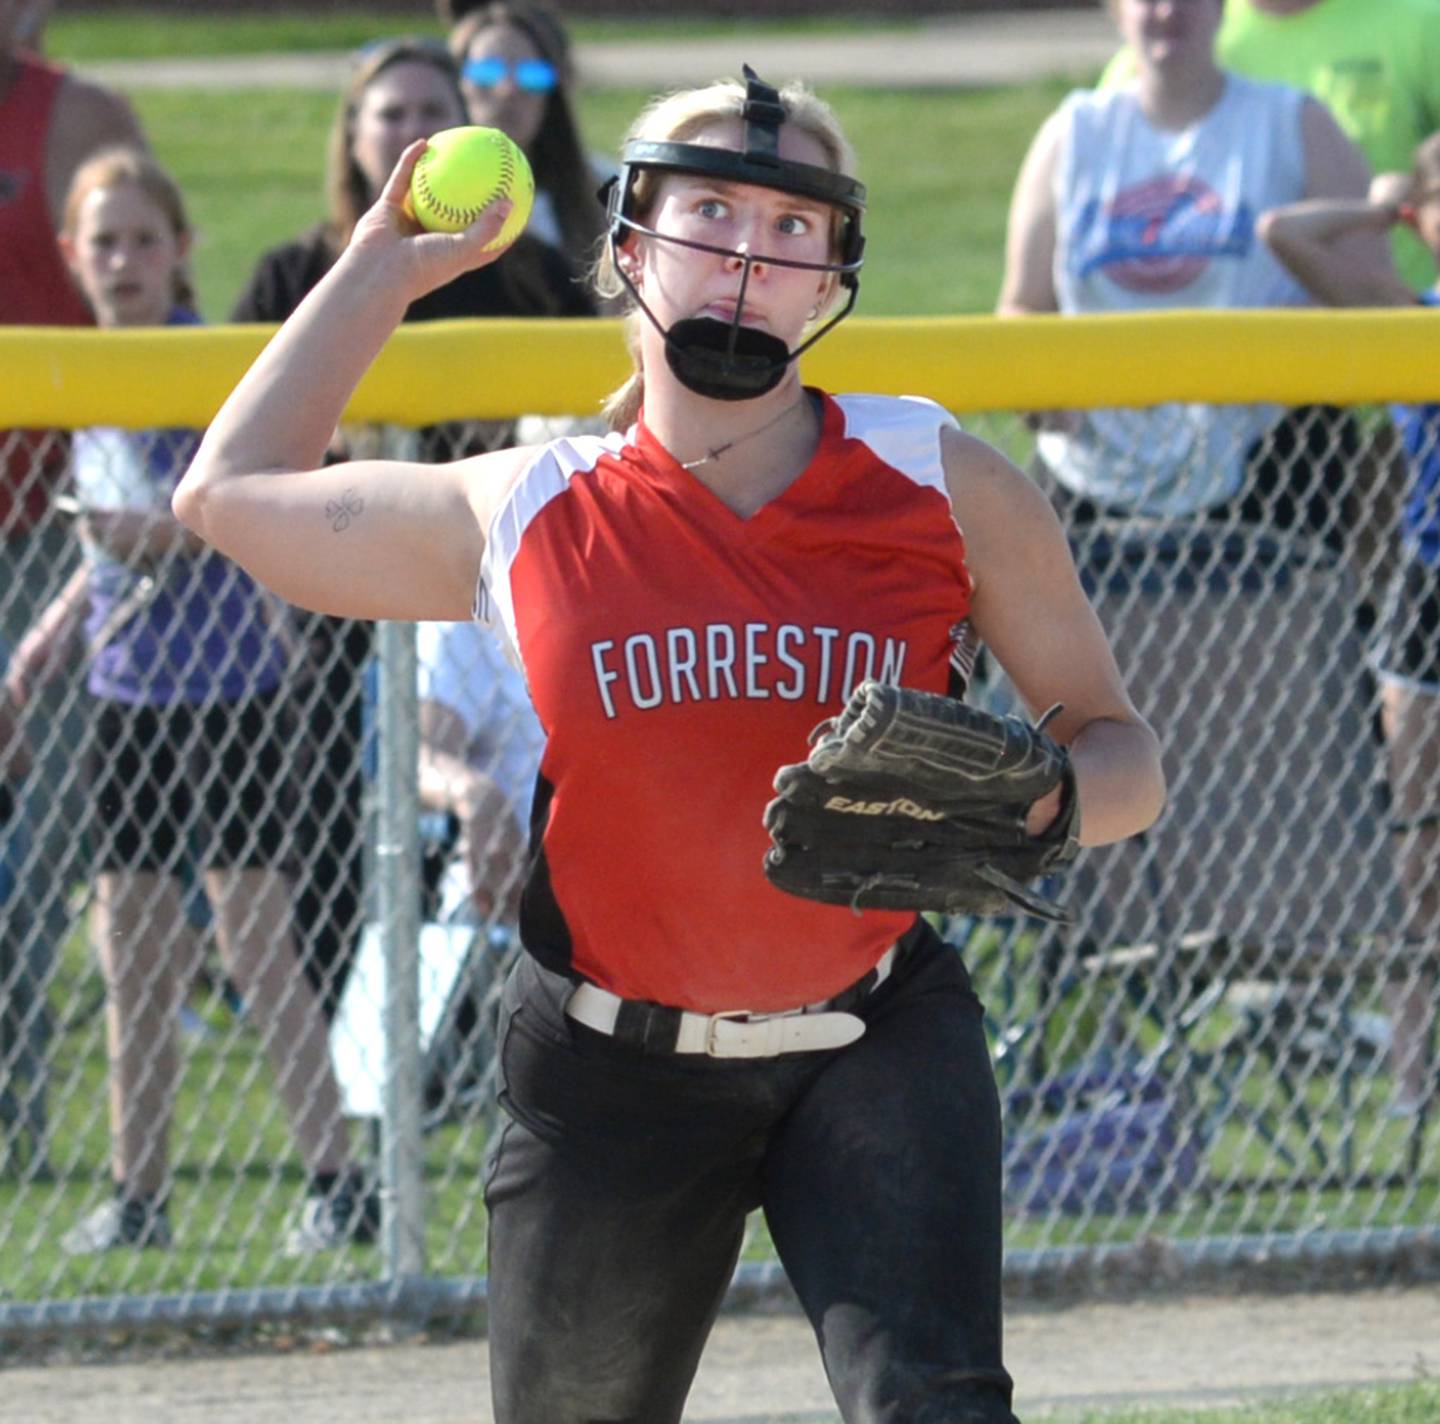 Forreston third baseman Rylee Broshous looks at an Orangeville runner before throwing to first for an out during the 1A Forreston Sectional against Orangeville on Tuesday, May 23.